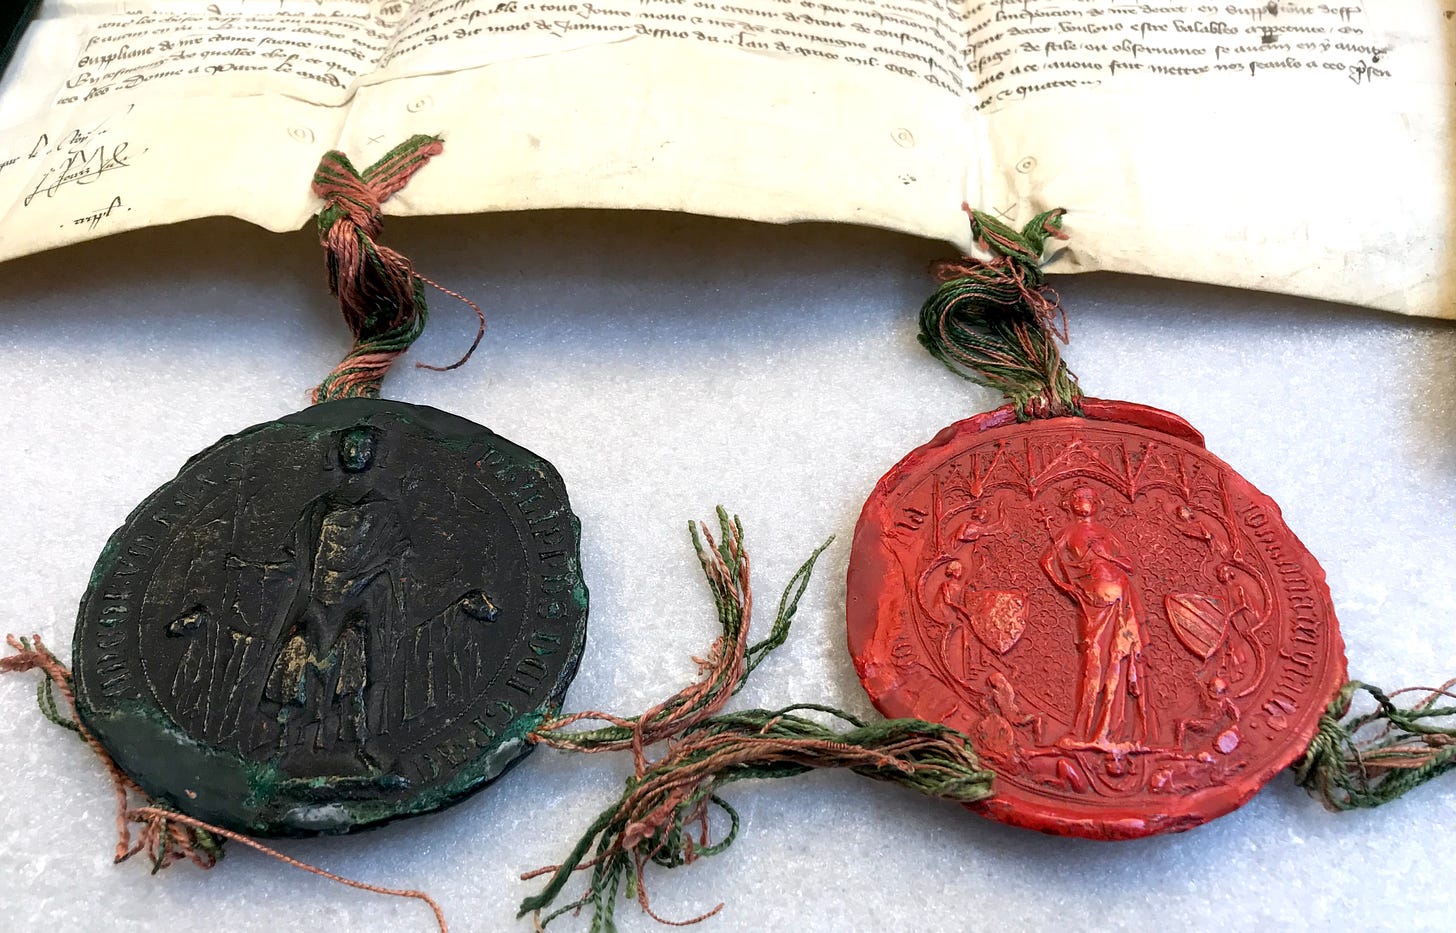 Photo of a fourteenth-century document (partial view), with two large round seals in wax attached to its bottom by silk ties, red and green: first seal to the left is dark green, with a king sitting on a throne holding a scepter; second is a red seal, showing a queen standing holding two small scepters.